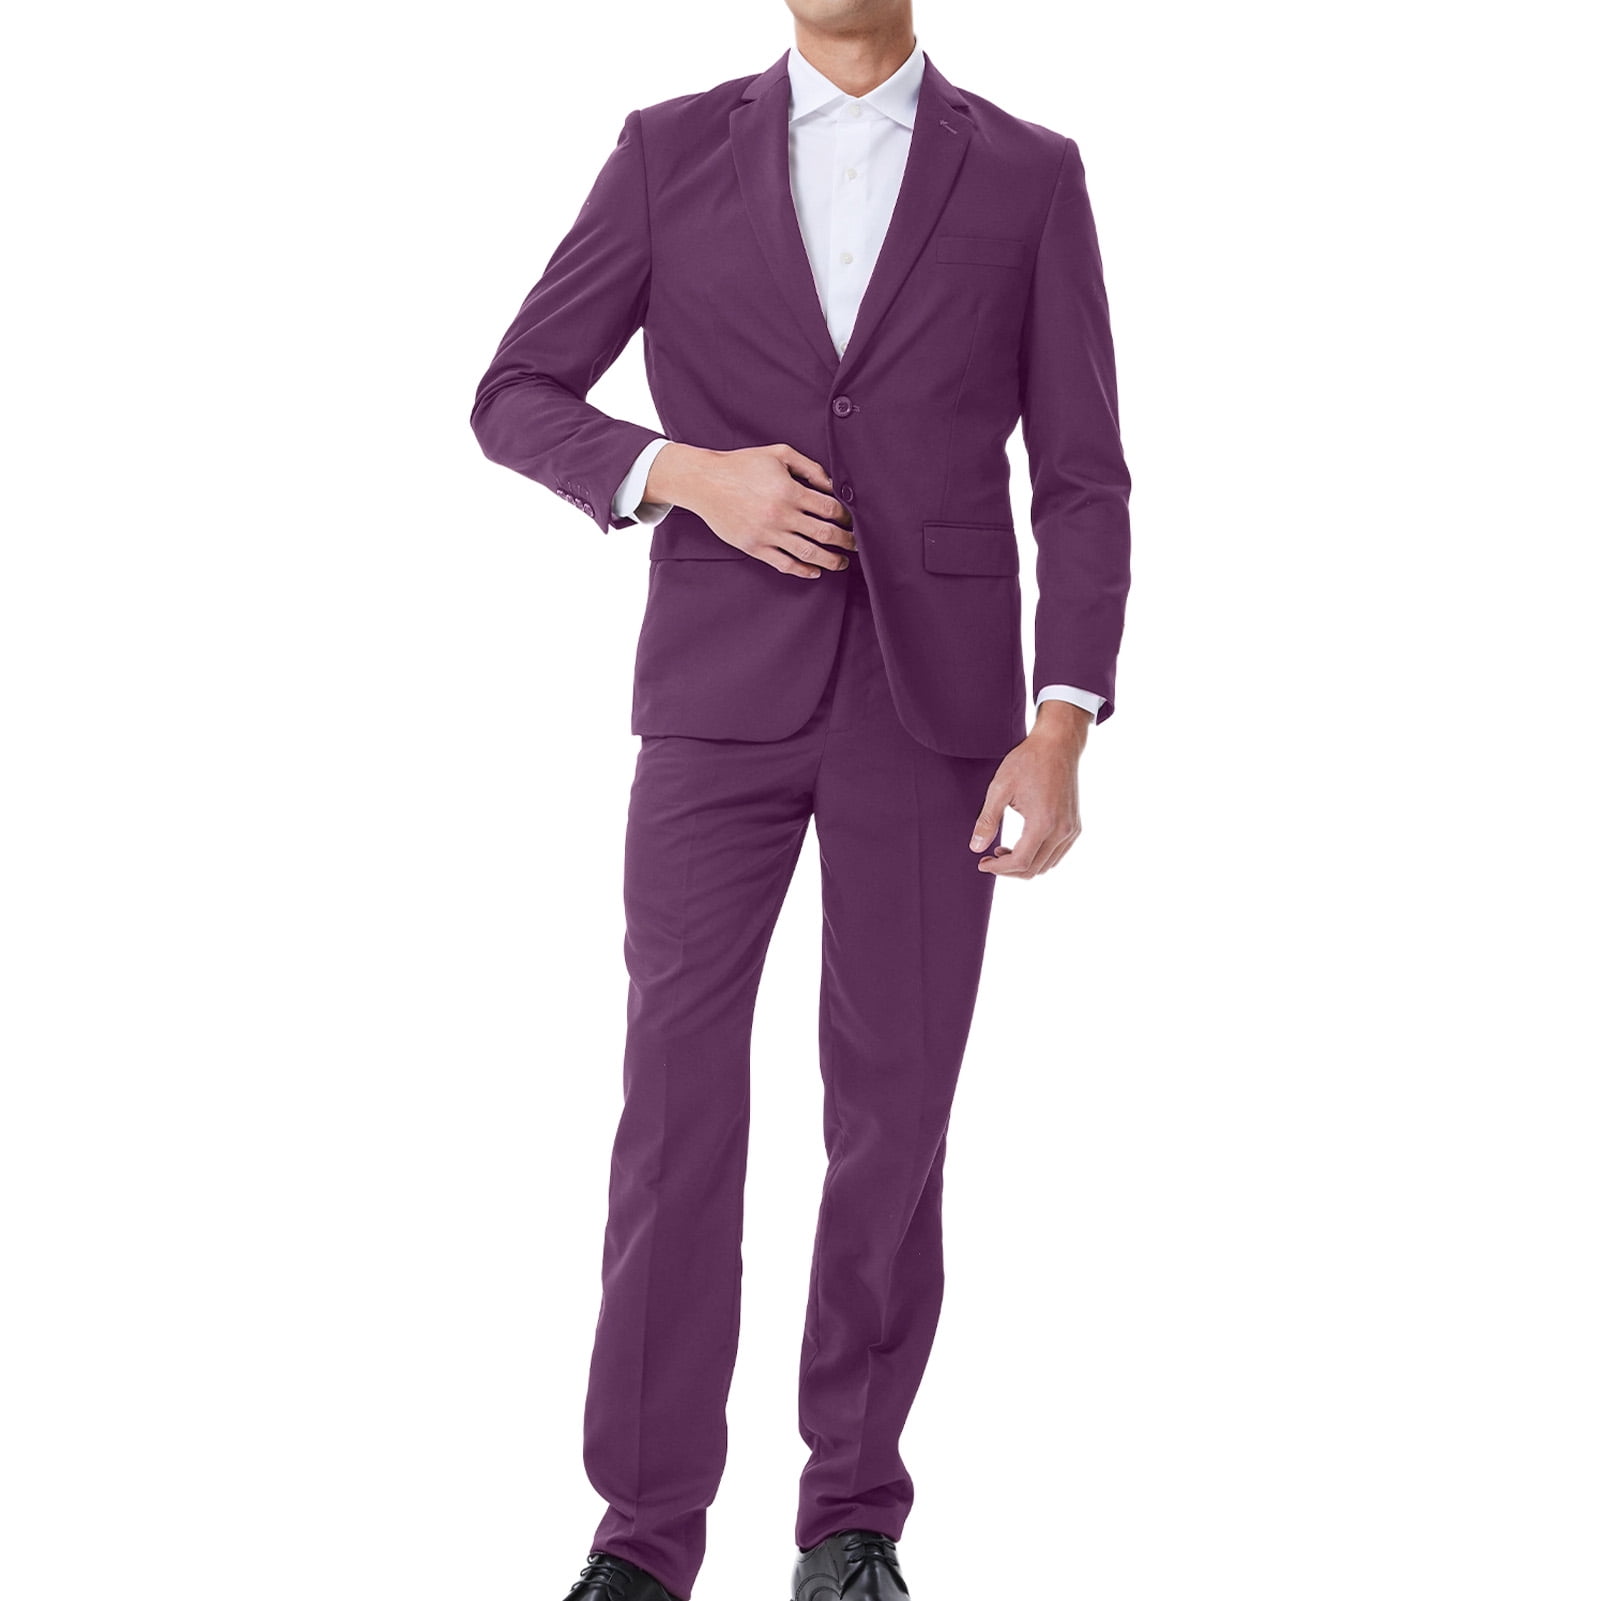 Help! 3 out of 4 of my groomsmen ordered this suit, but the 4th didn't get  it in time and now the color is out of stock! : r/wedding